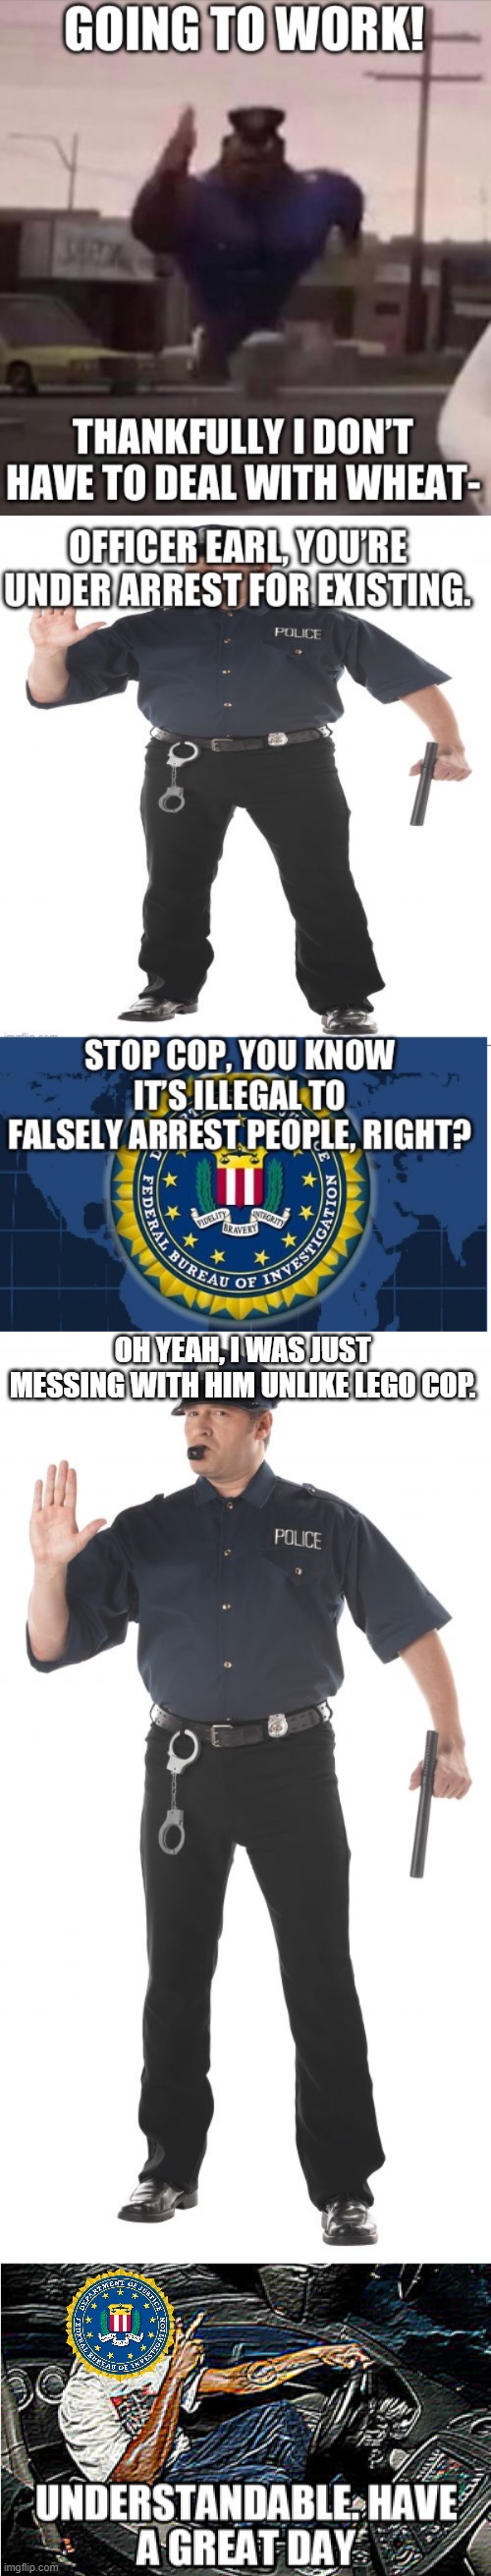 OH YEAH, I WAS JUST MESSING WITH HIM UNLIKE LEGO COP. | image tagged in memes,stop cop,understandable have a great day | made w/ Imgflip meme maker